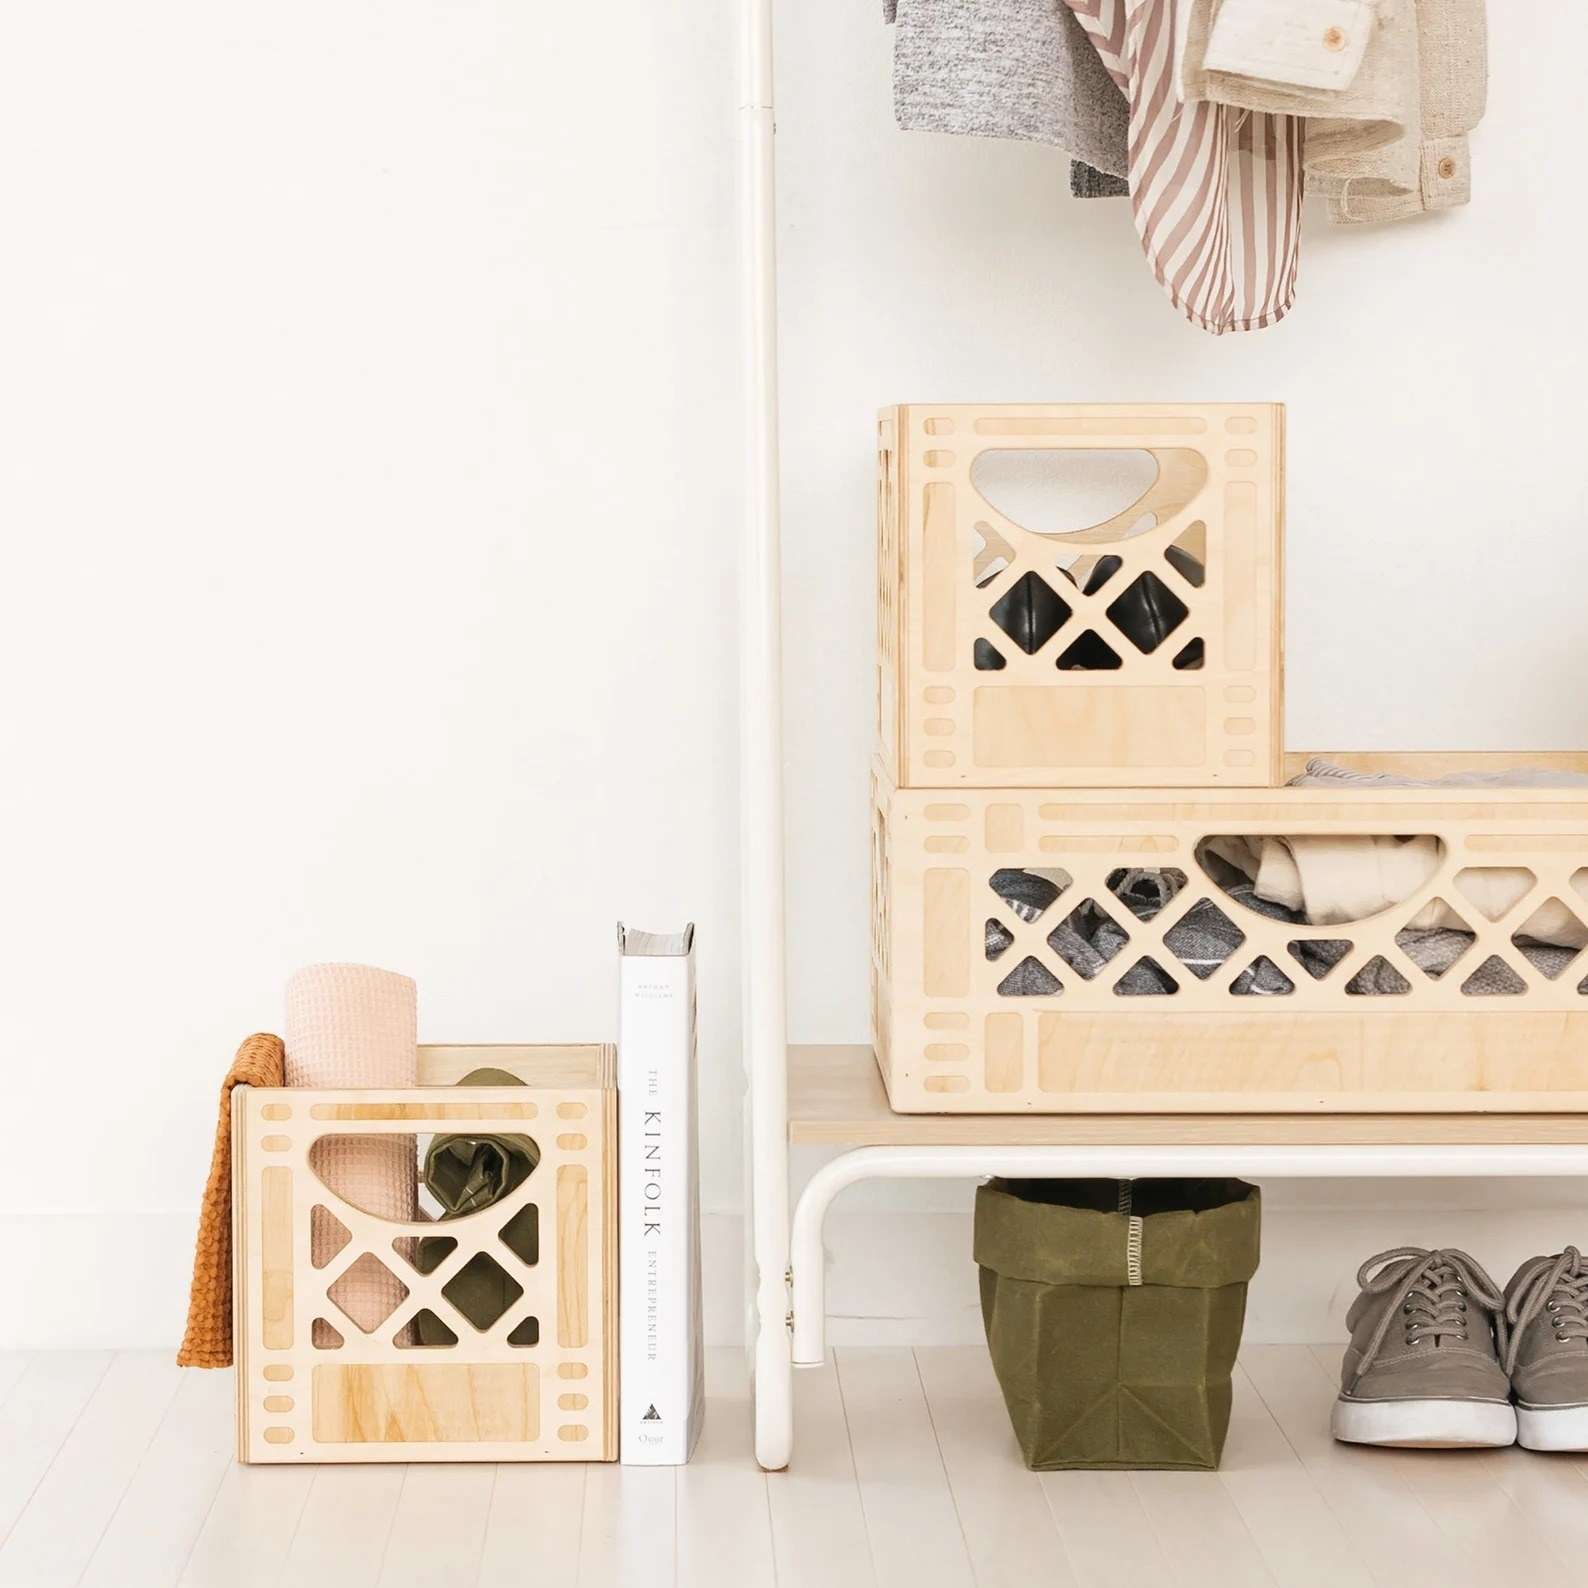 A set of maple wood milk crates are shown storing things in a bedroom